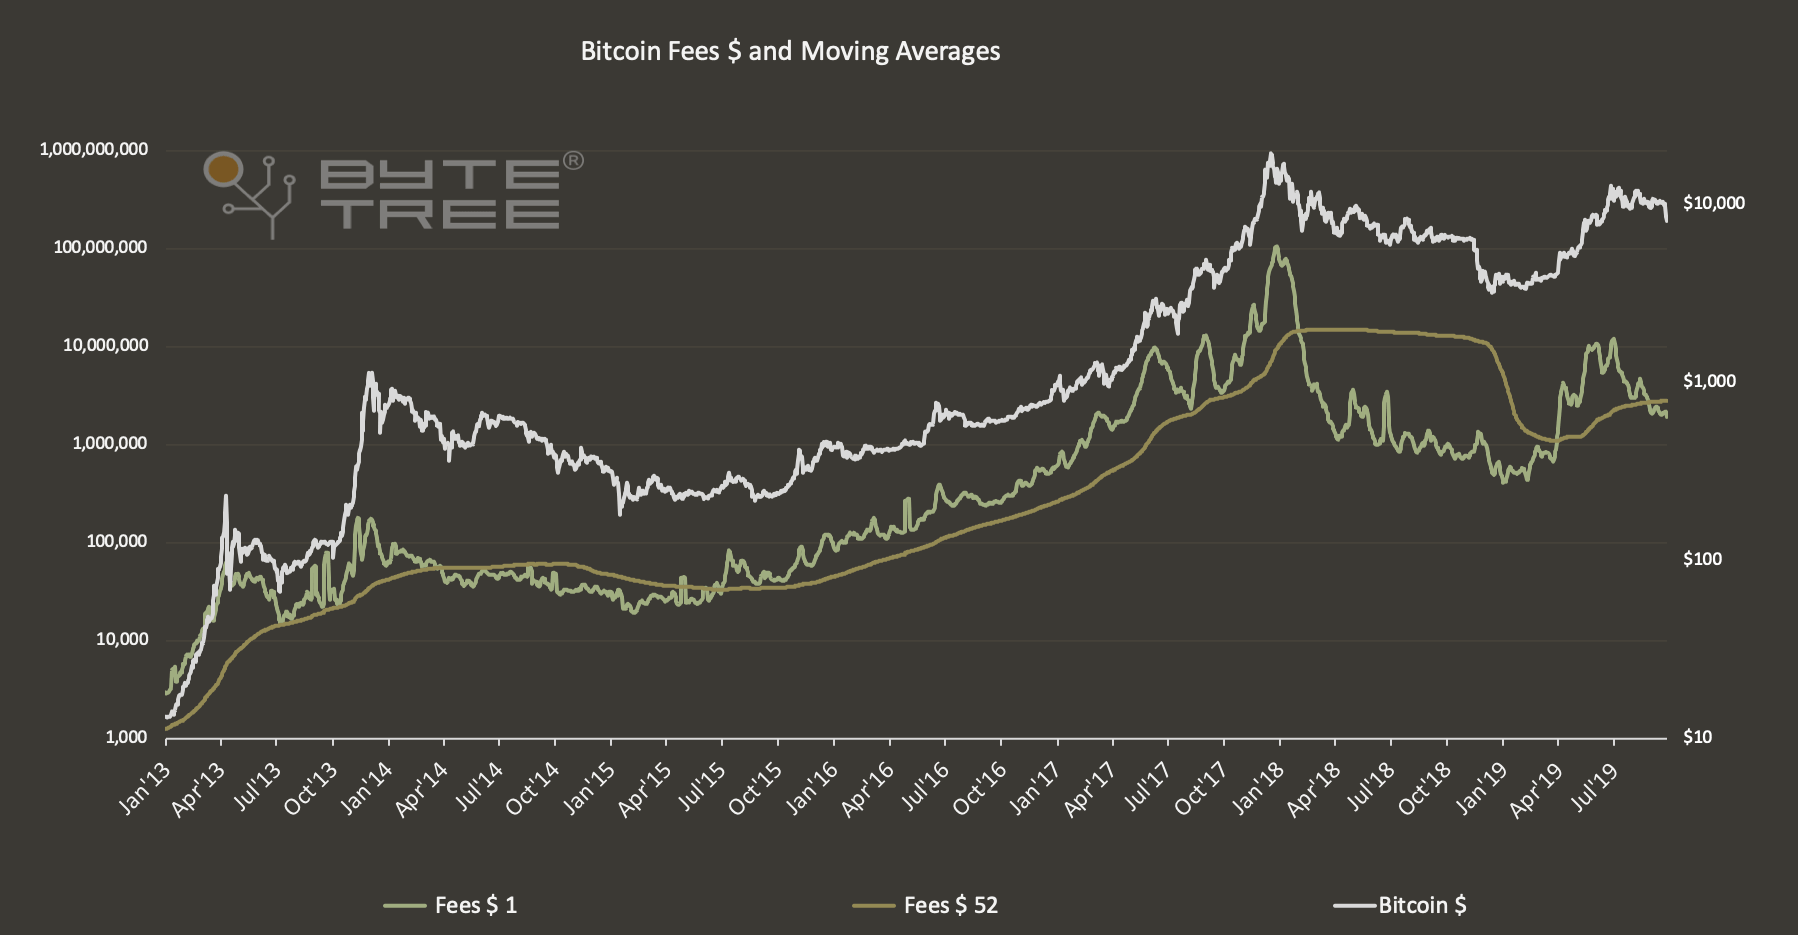 Source ByteTree.com: Bitcoin $ (black), 1 week (blue) and 52 week (red) fees in US$ since 2013.